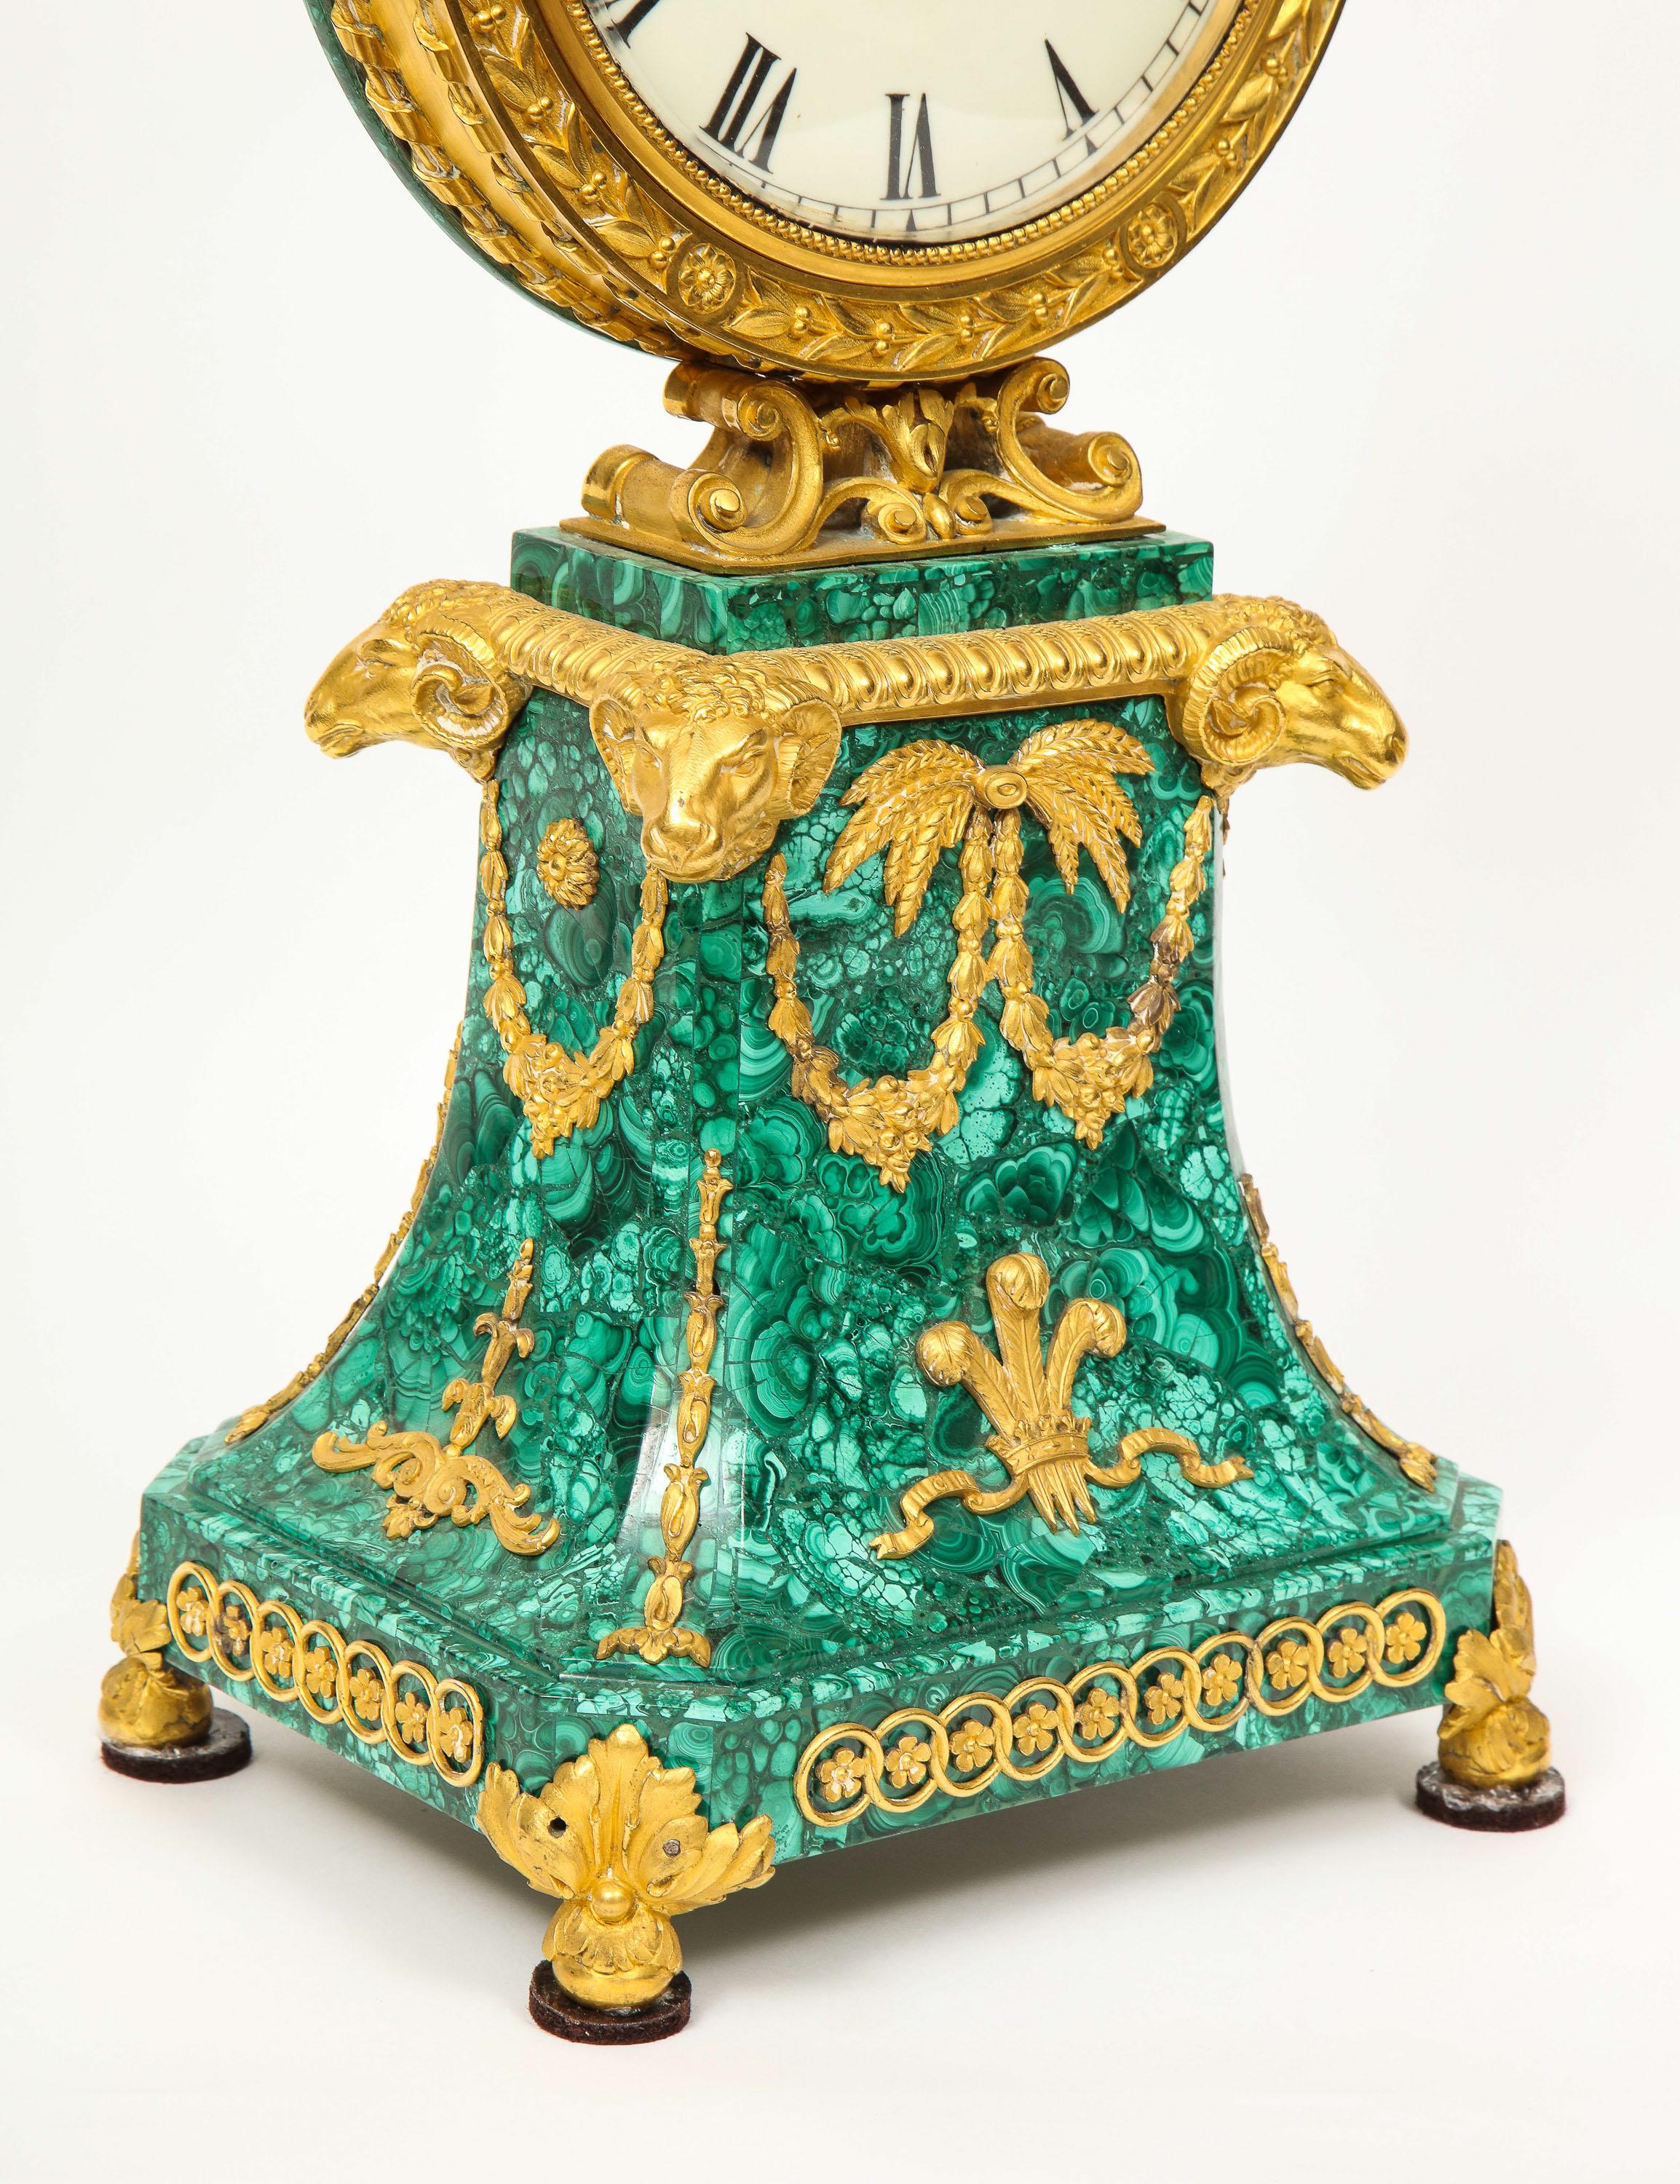 20th Century Edward F. Caldwell, An Extremely Fine and Rare Ormolu-Mounted Malachite Clock For Sale